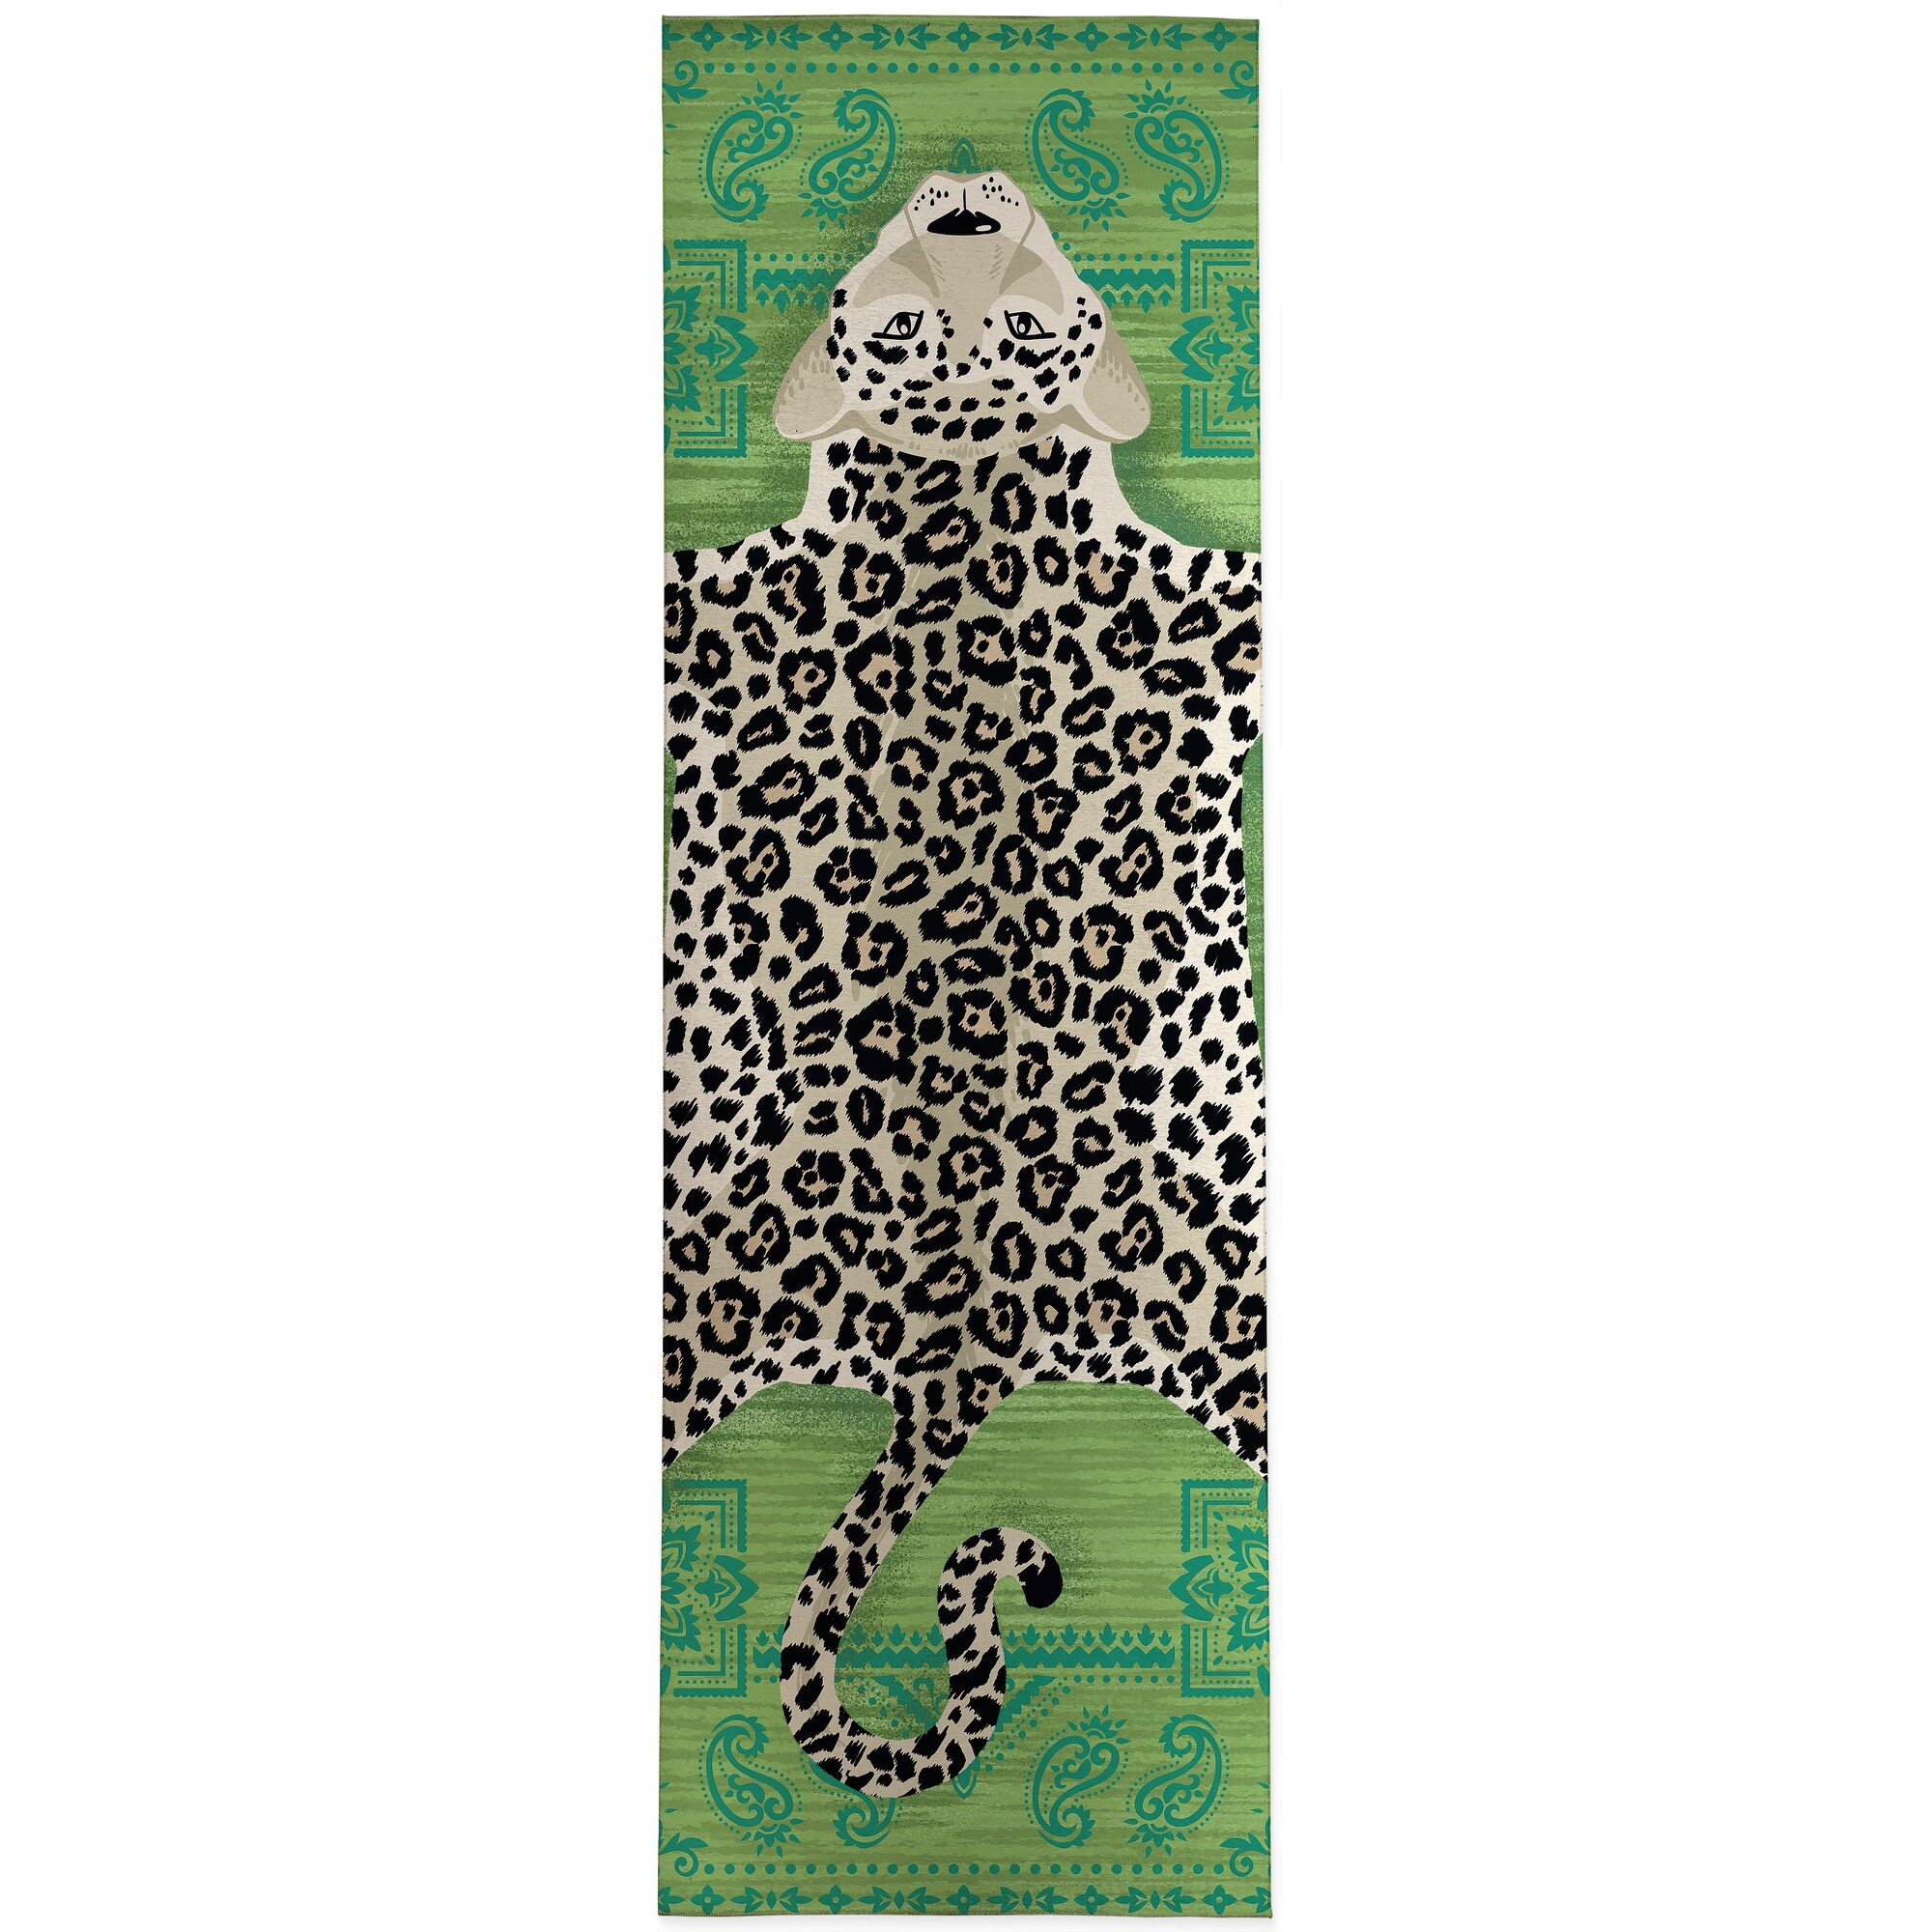 https://ak1.ostkcdn.com/images/products/is/images/direct/4a2760909380e9a22b08de445eb0a6bde06898a1/SNOW-LEOPARD-GREEN-%26-TEAL-Area-Rug-By-Kavka-Designs.jpg